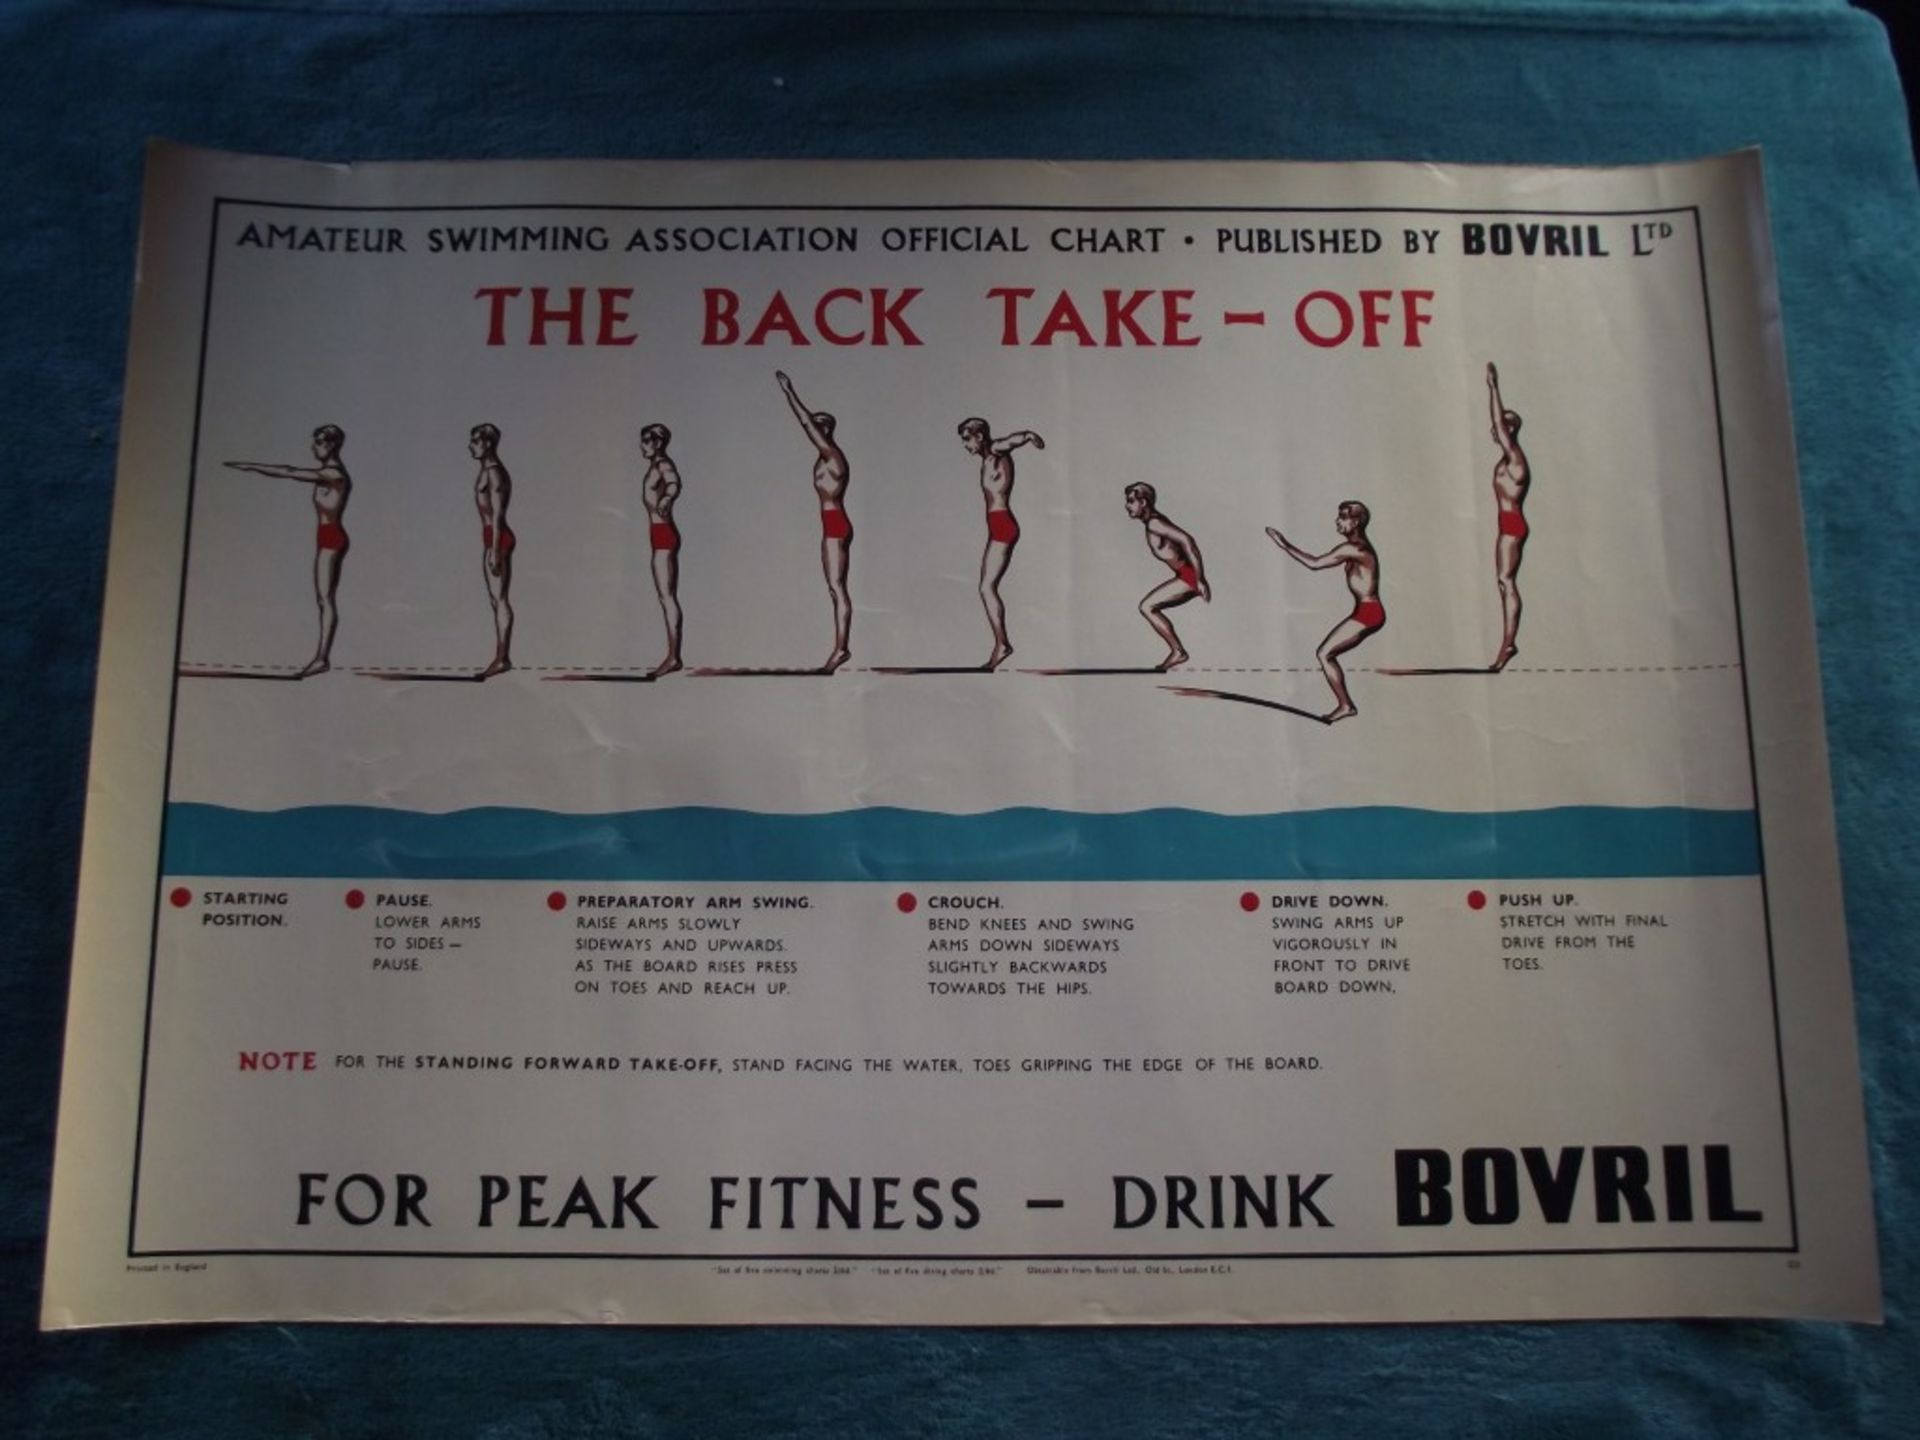 4 X 1950's Original 'Amateur Swimming Association' advertising posters, published by Bovril Ltd. - Image 27 of 51